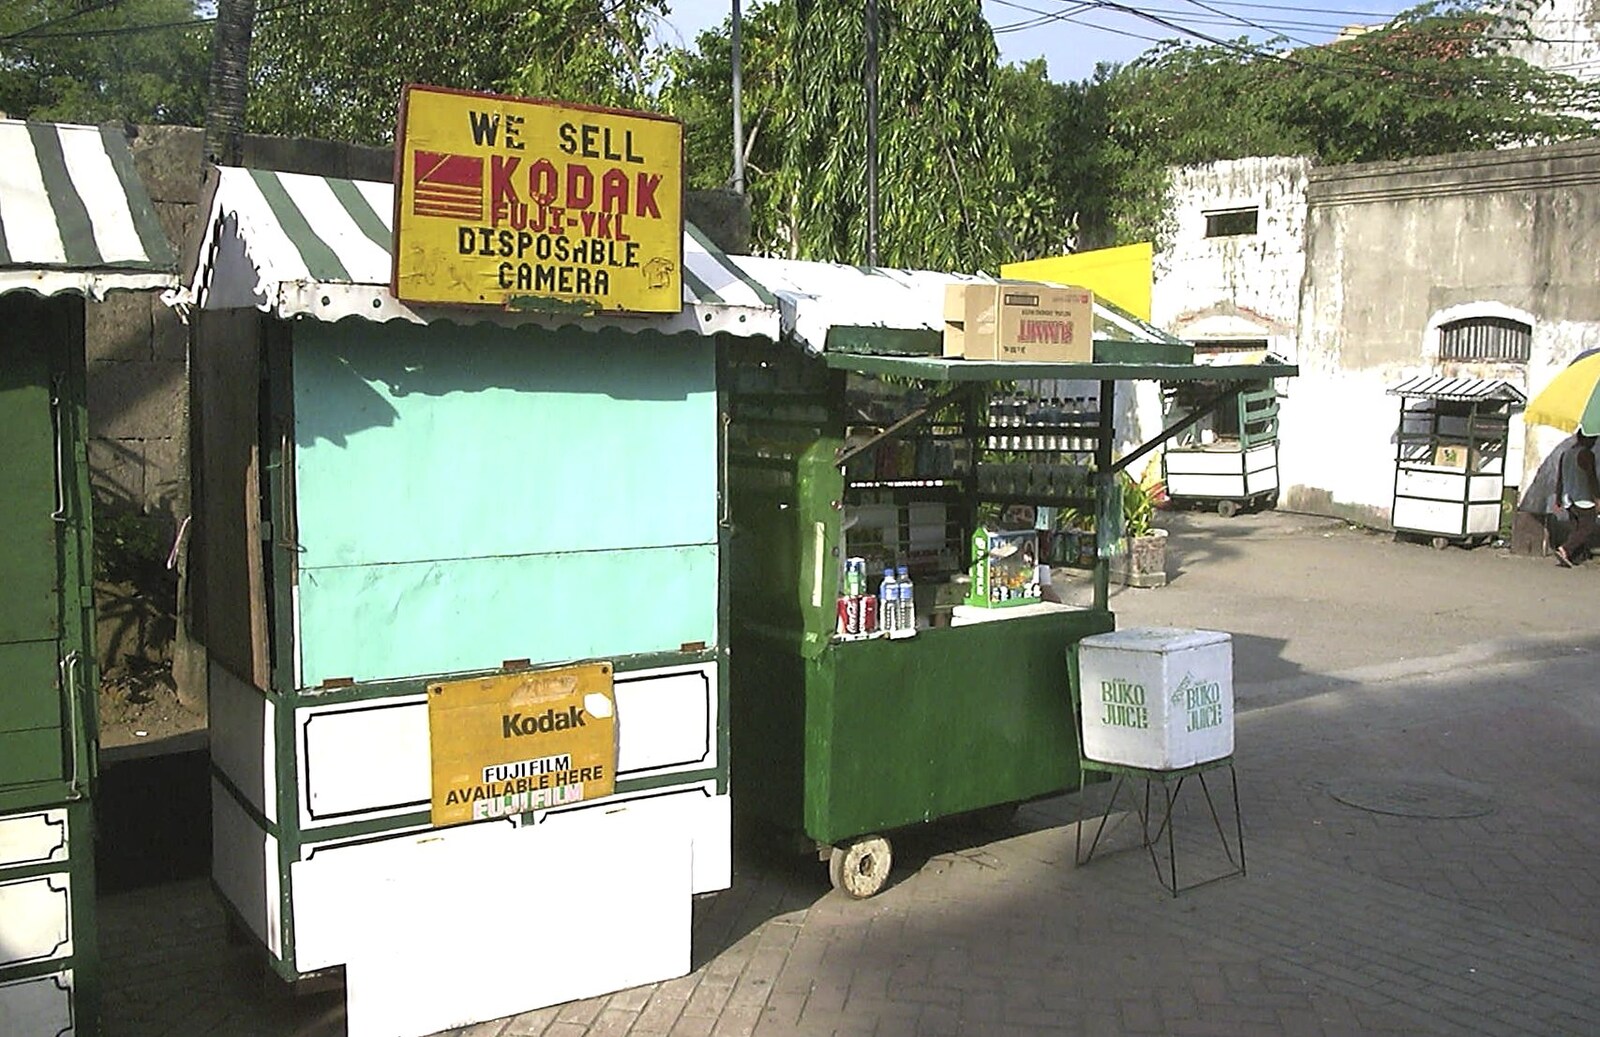 A small snack shack from A Postcard From Manila: a Working Trip, Philippines - 9th July 2004